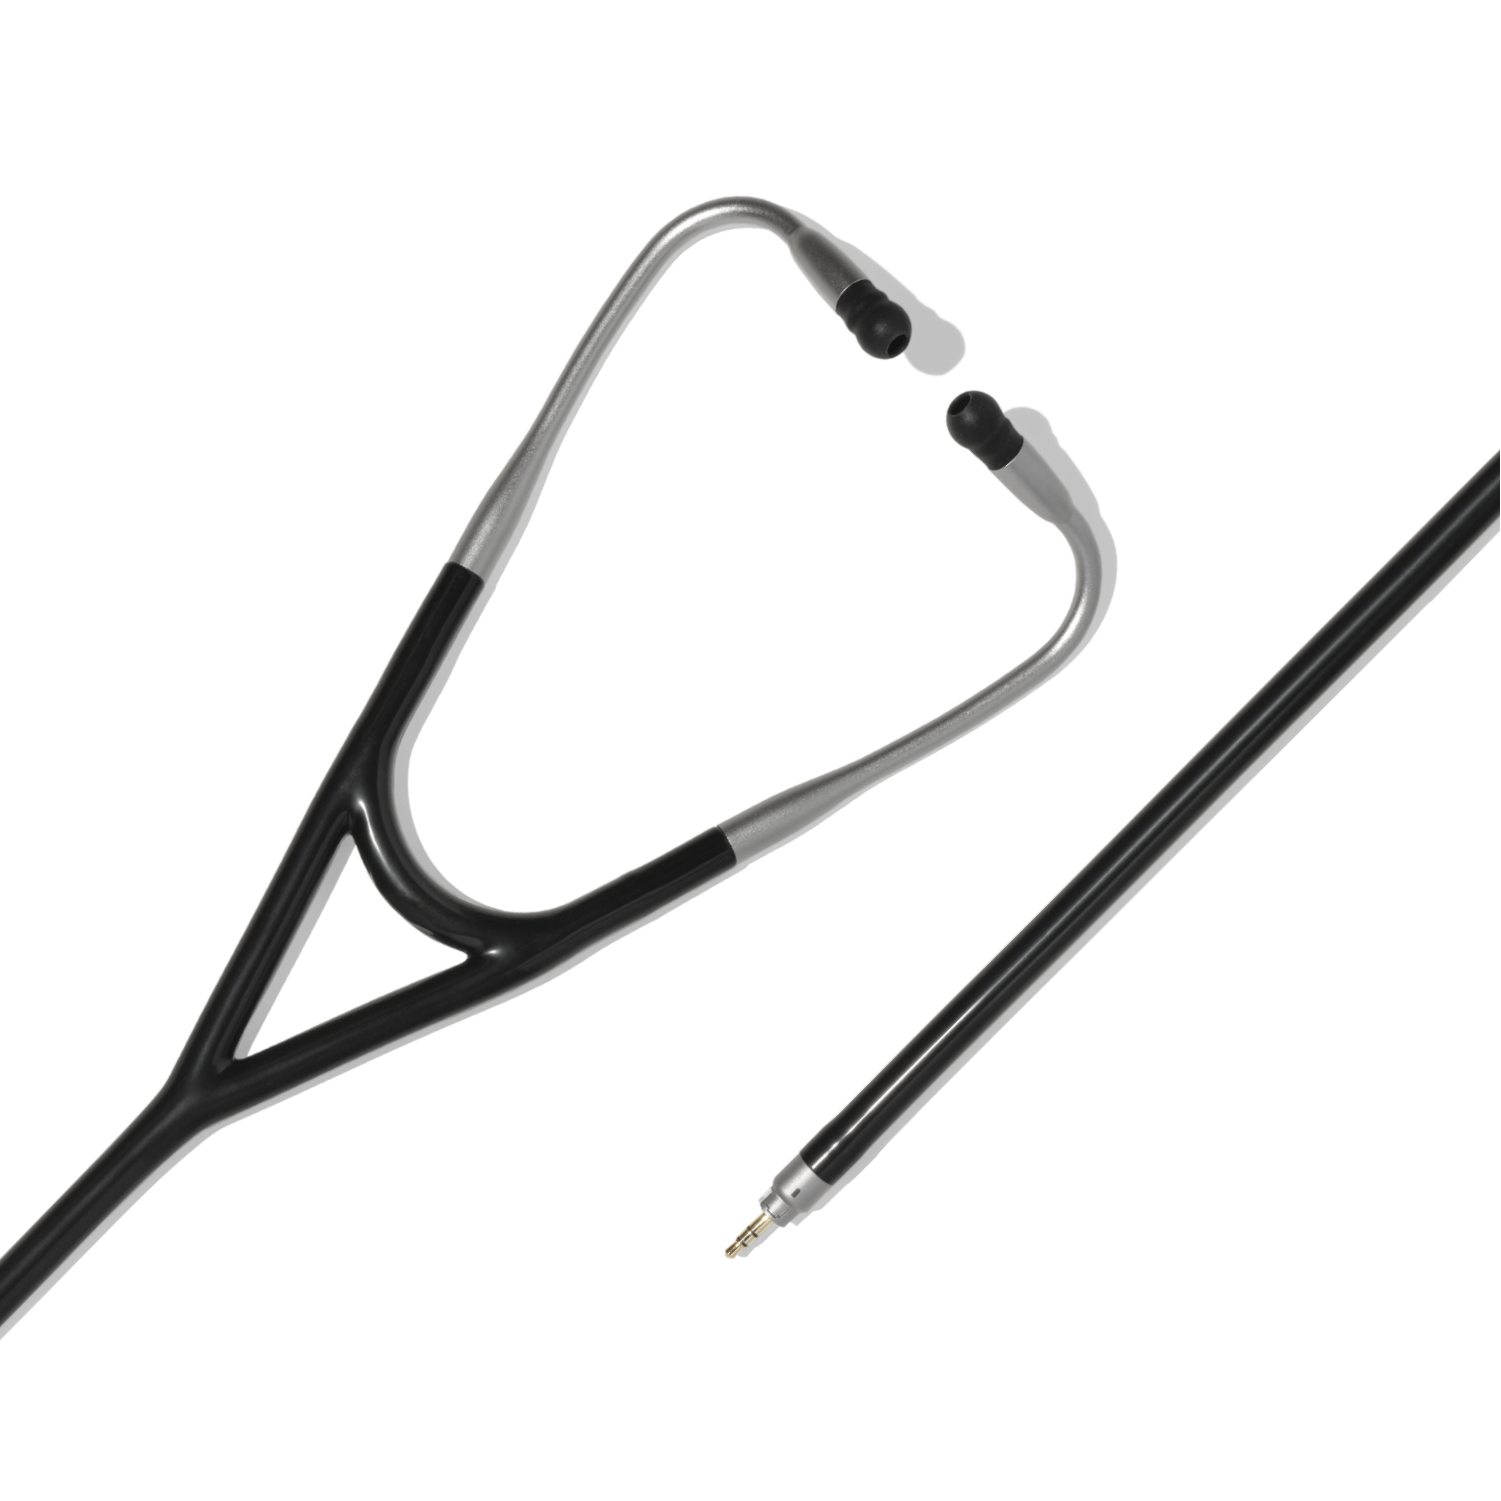 Eko CORE 500™ Digital Stethoscope ear tips and quick disconnect to chest piece